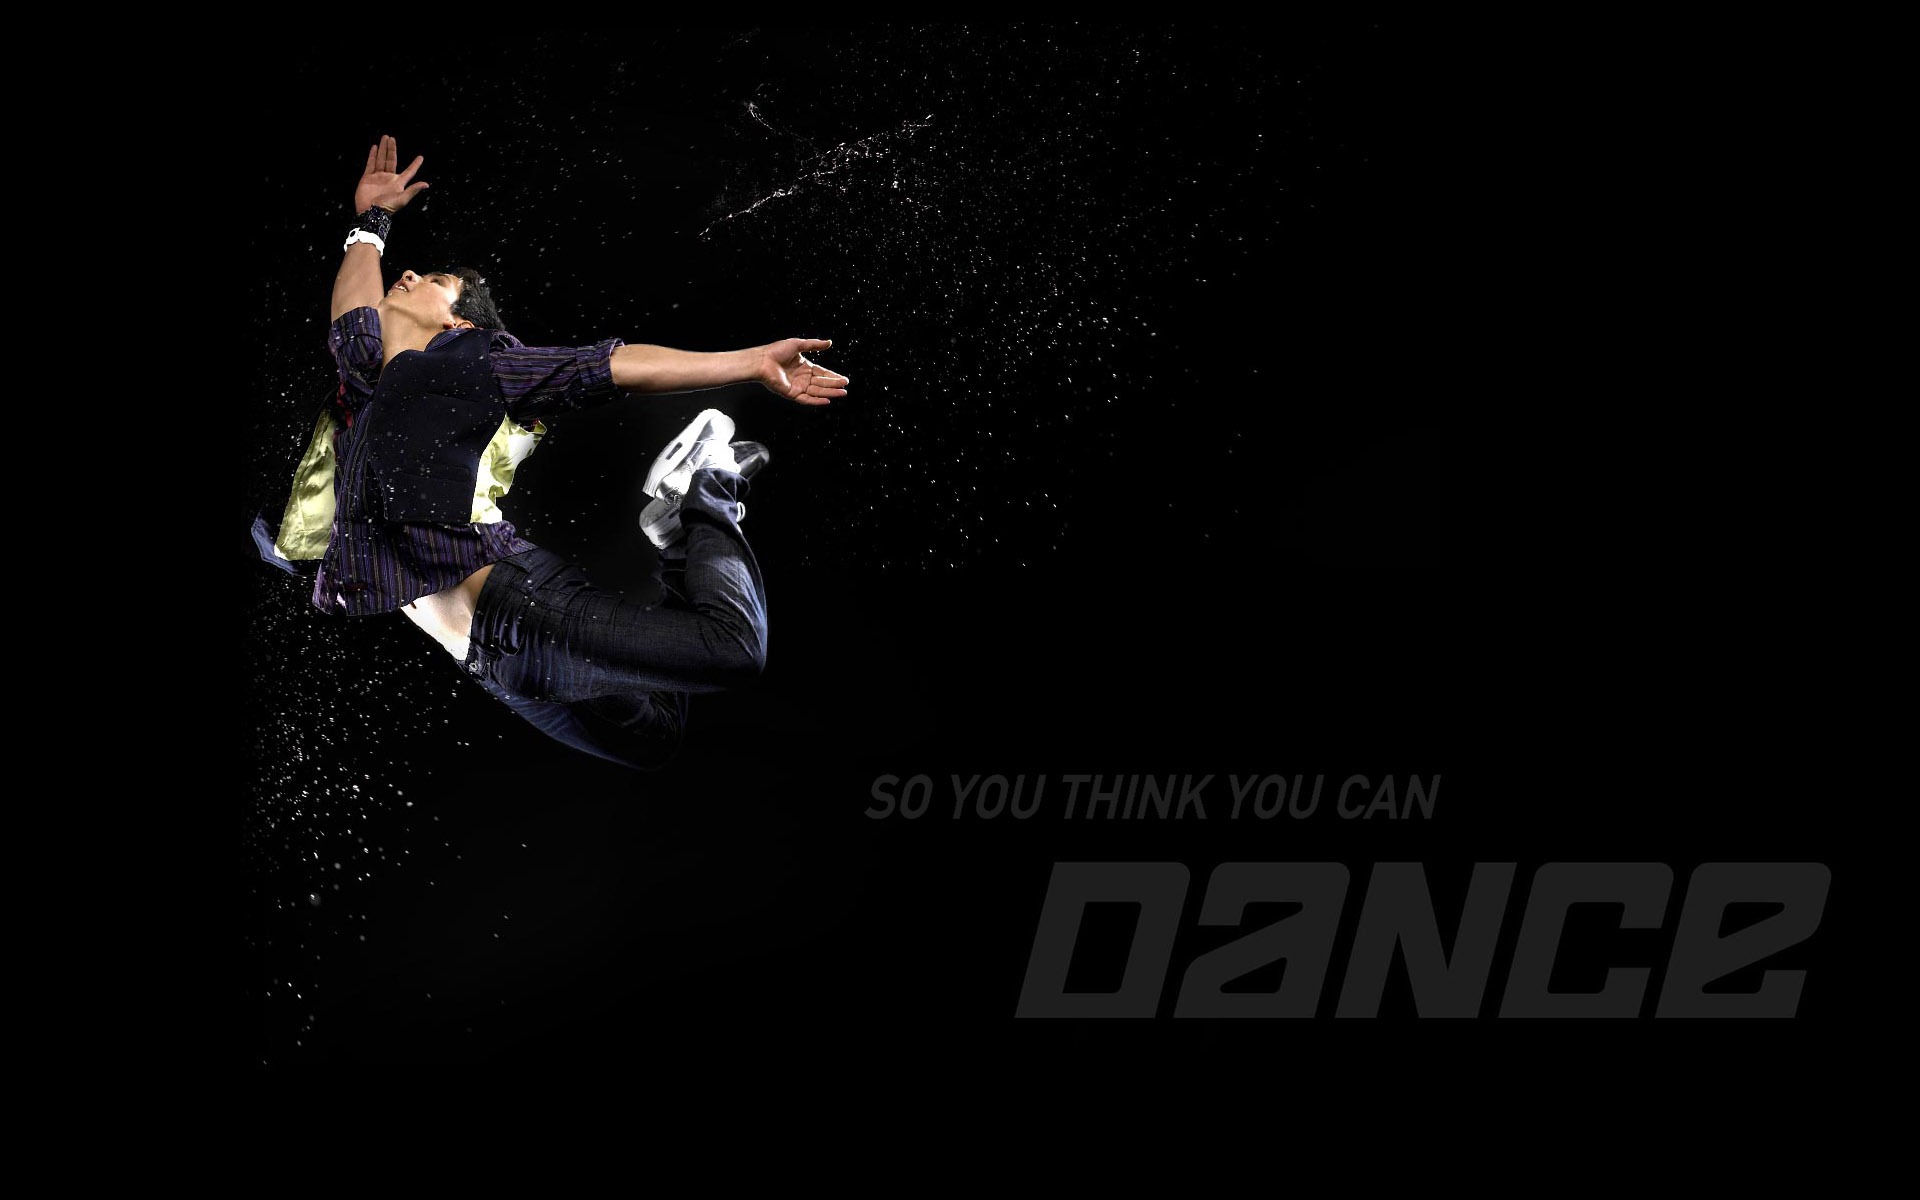 So You Think You Can Dance 舞林争霸 壁纸(一)8 - 1920x1200